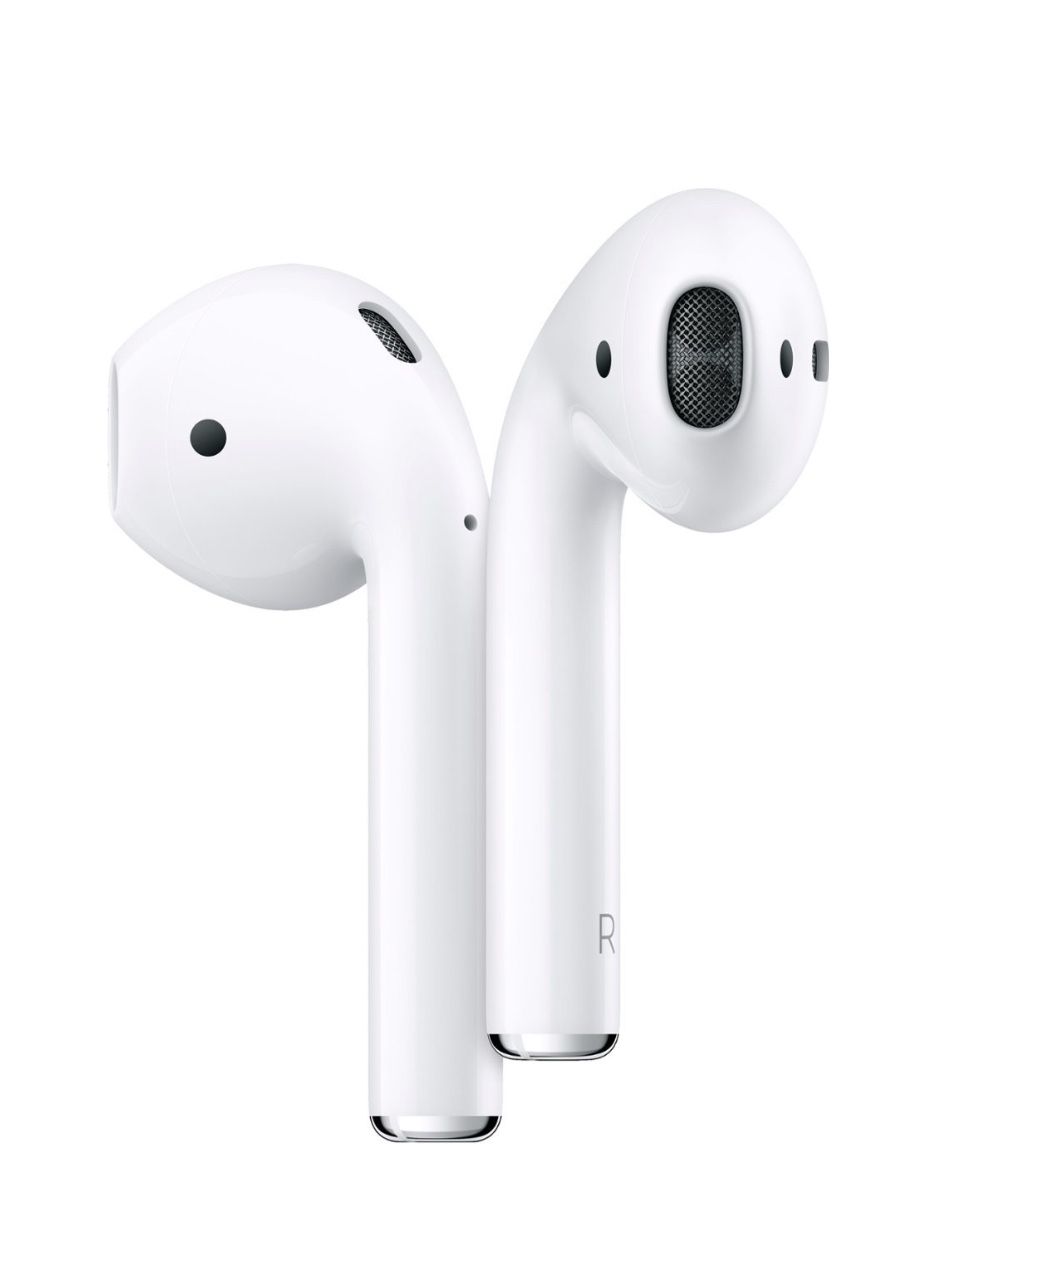 Authentic Apple AirPods 2nd generation Wireless Headphones w/ Charging Case